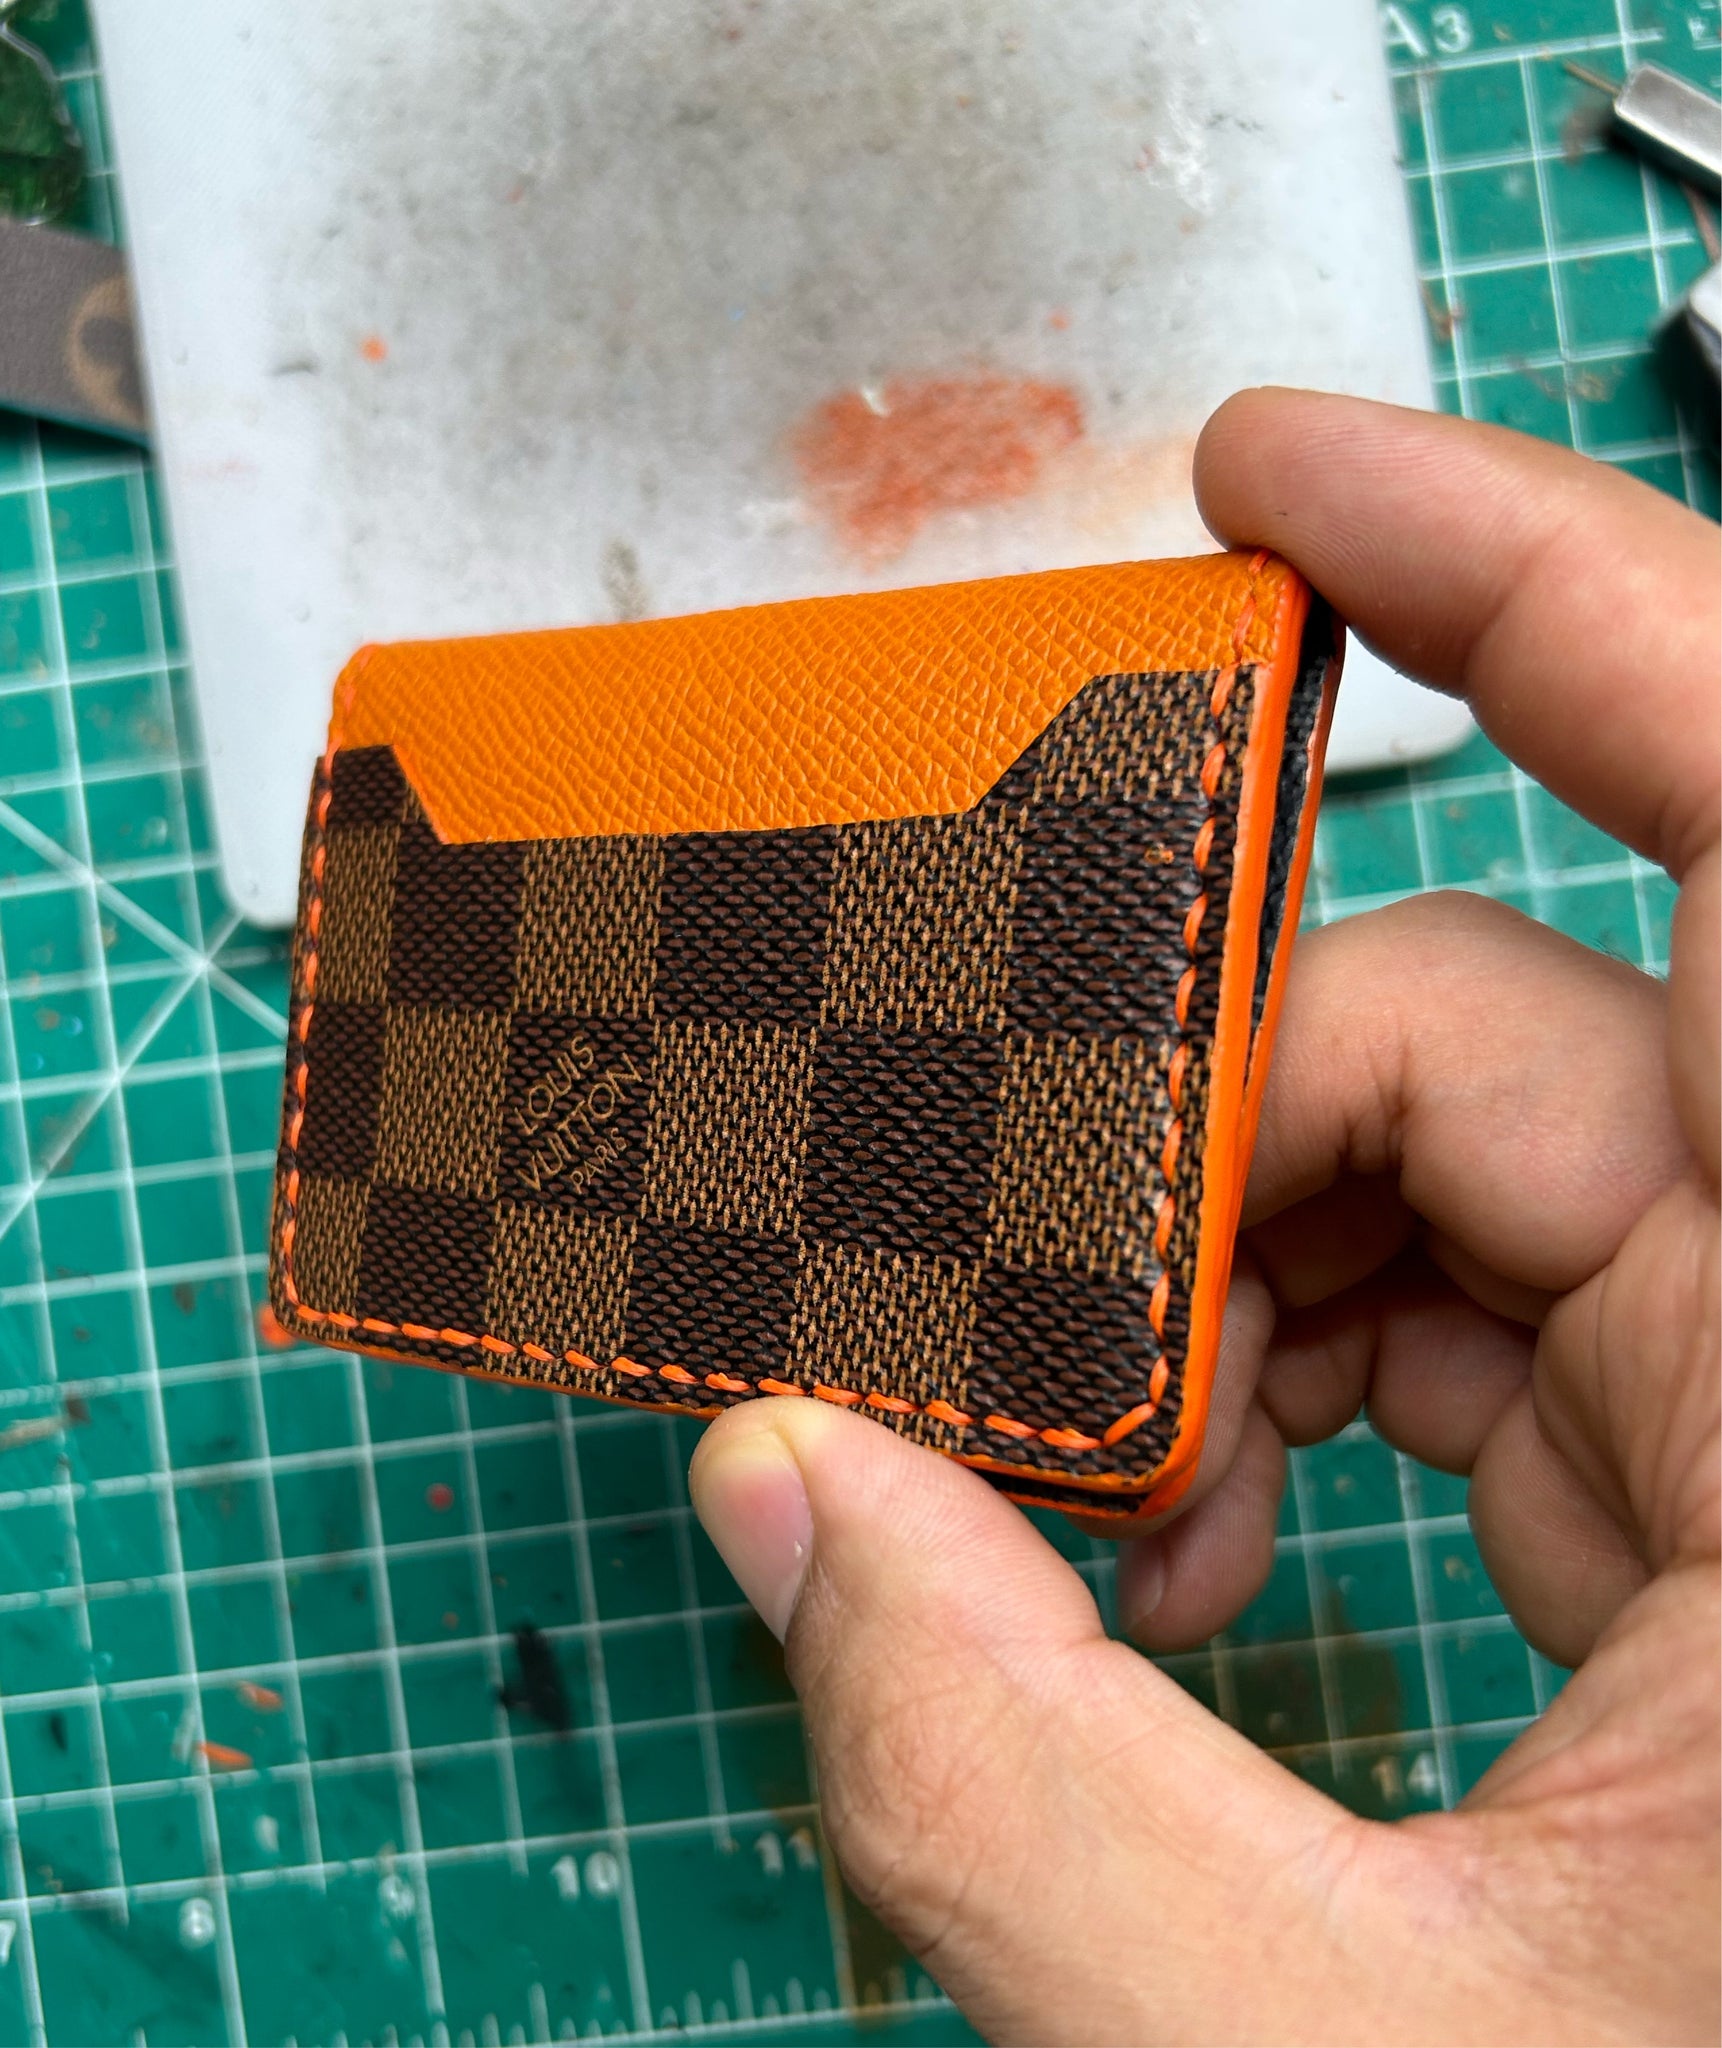 louis vuitton wallet with card holder